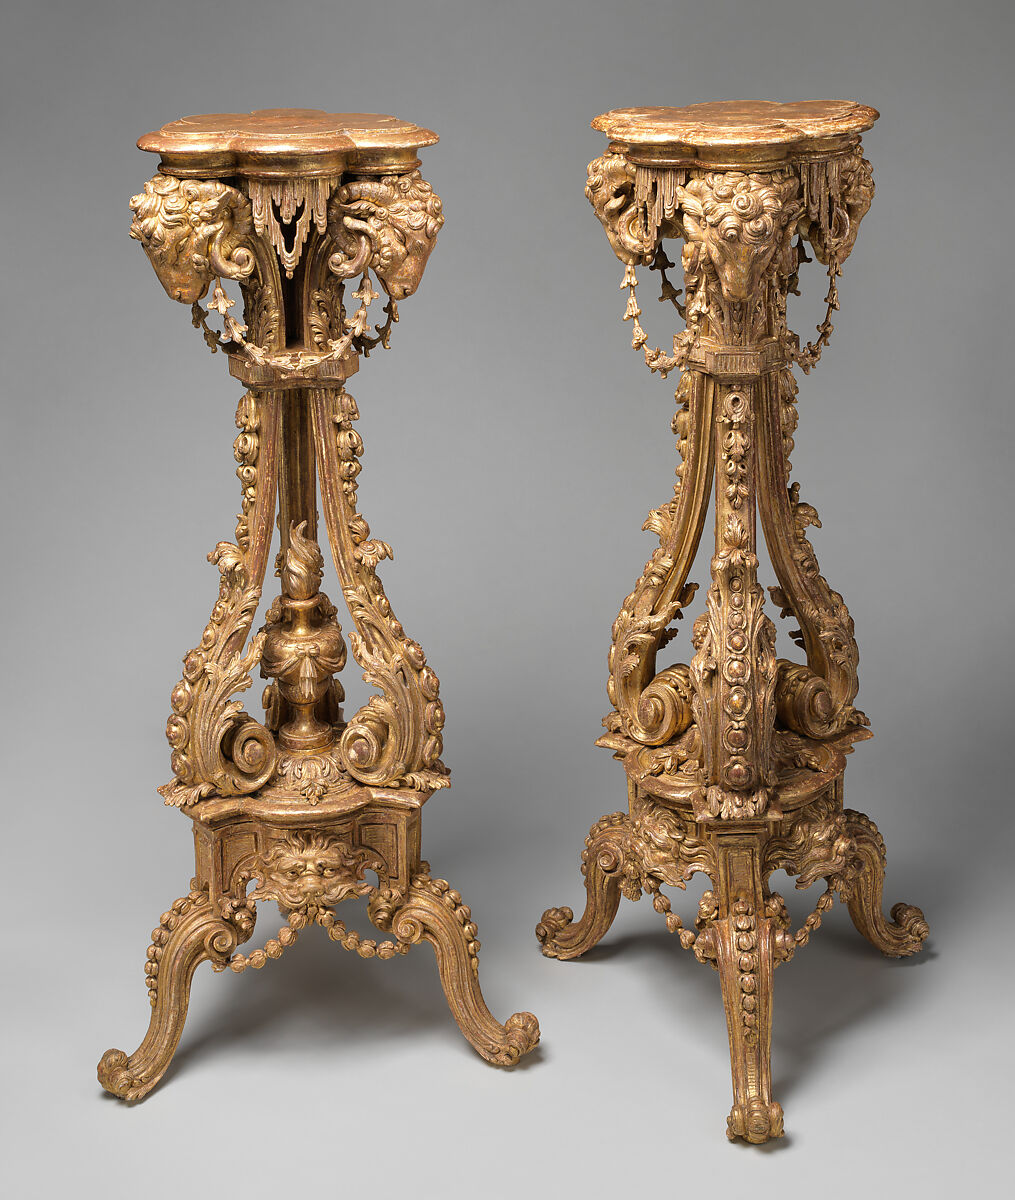 Pair of tripod candlestands or torchères, Thomas Chippendale (British, baptised Otley, West Yorkshire 1718–1779 London)  , after a manuscript design, Carved and gilded wood (pine?), British 